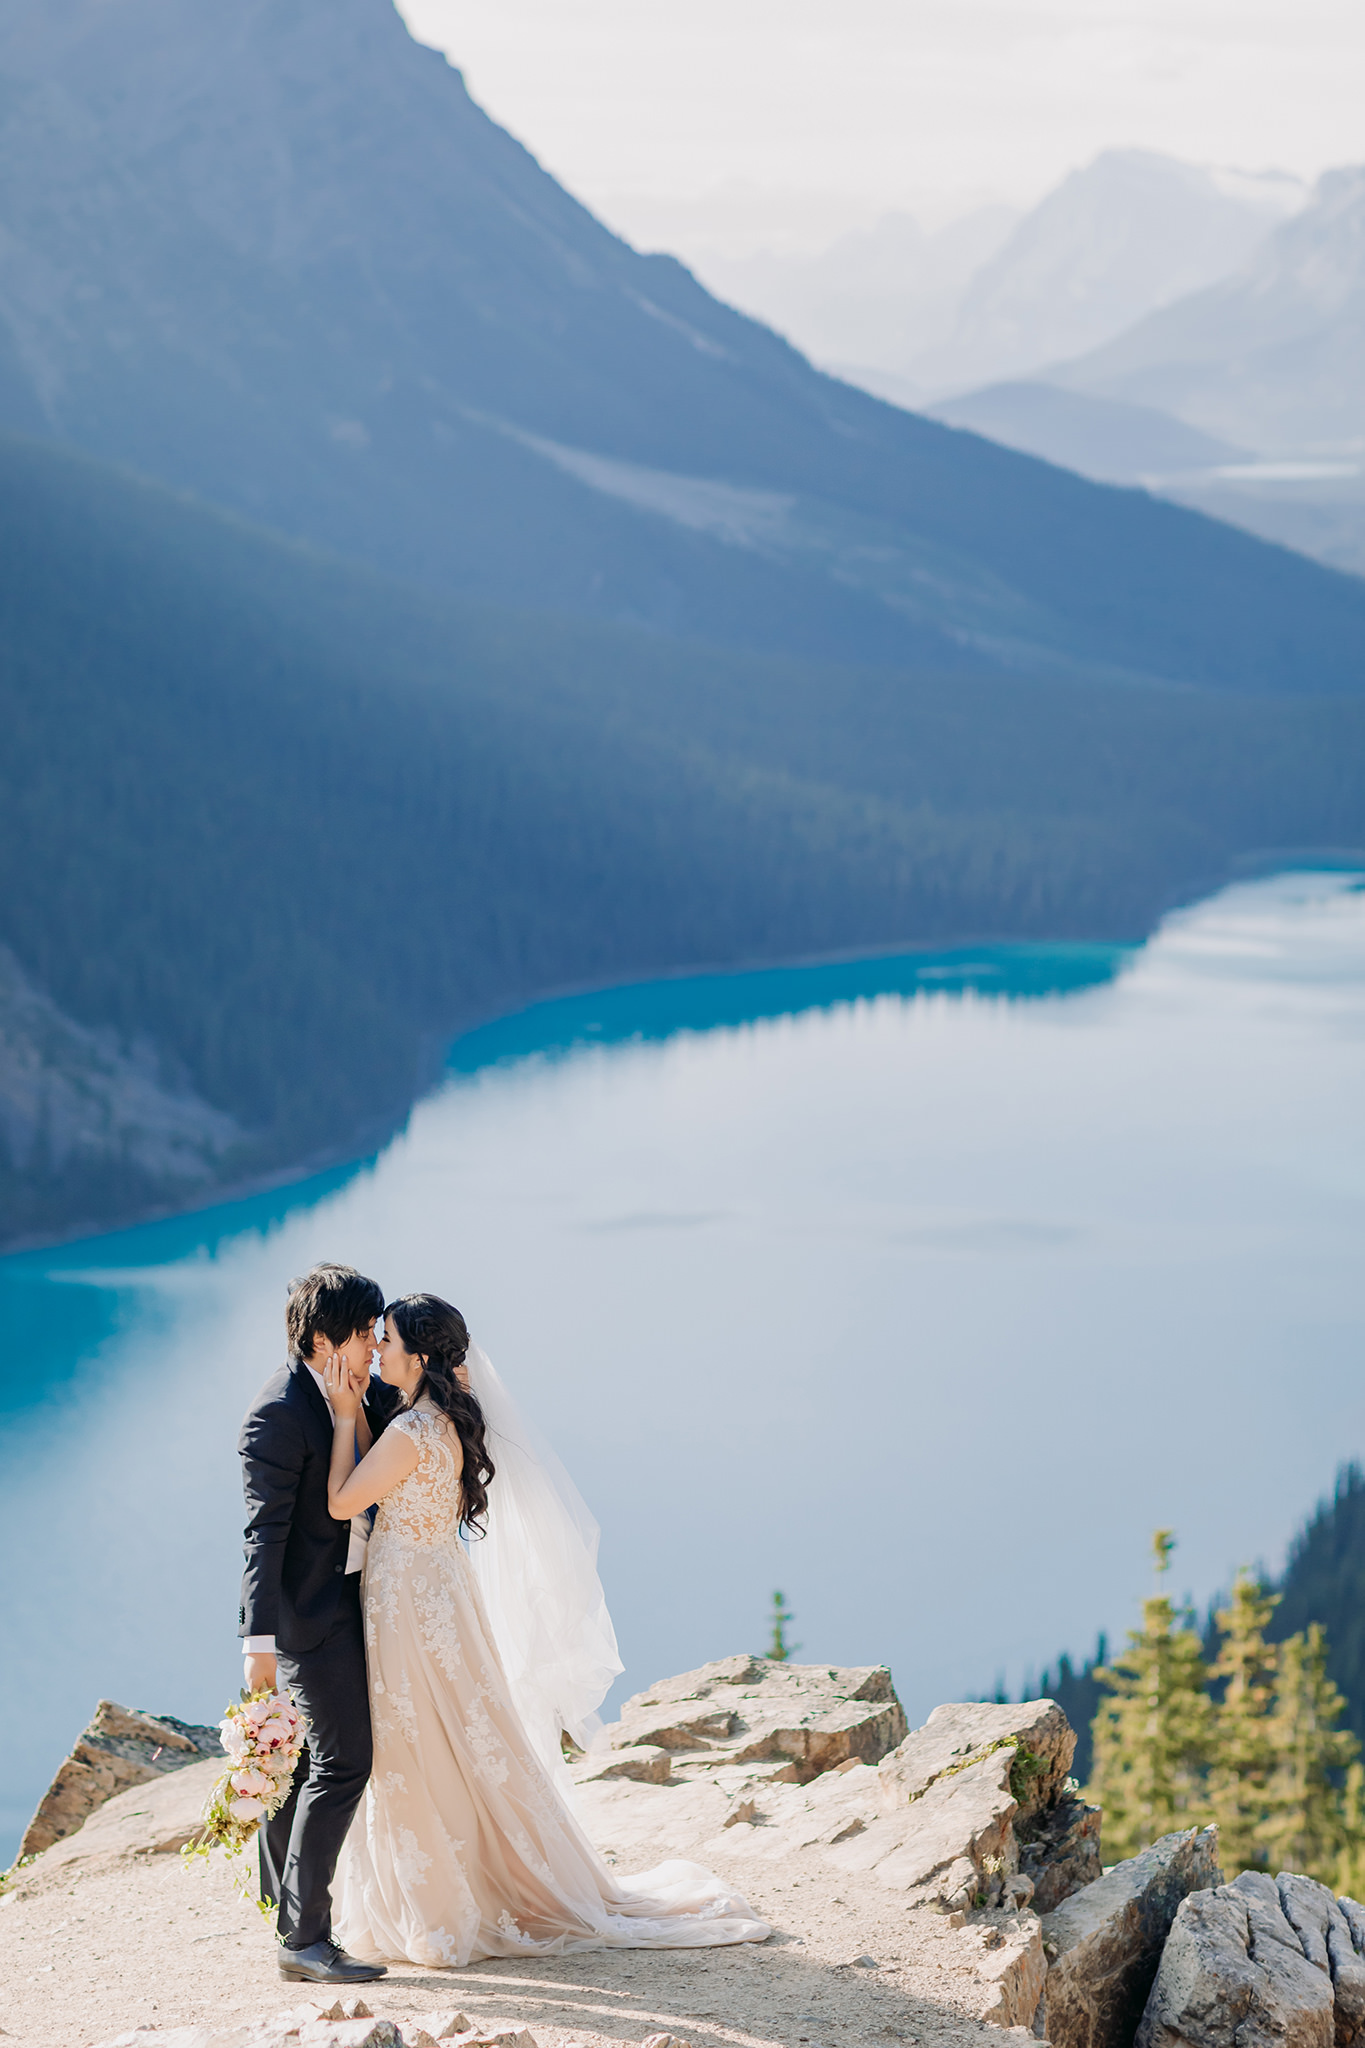 Rocky Mountain wedding tour bride groom portraits at Peyto Lake viewpoint in the evening in Banff National Park photographed by mountain elopement specialist ENV Photography